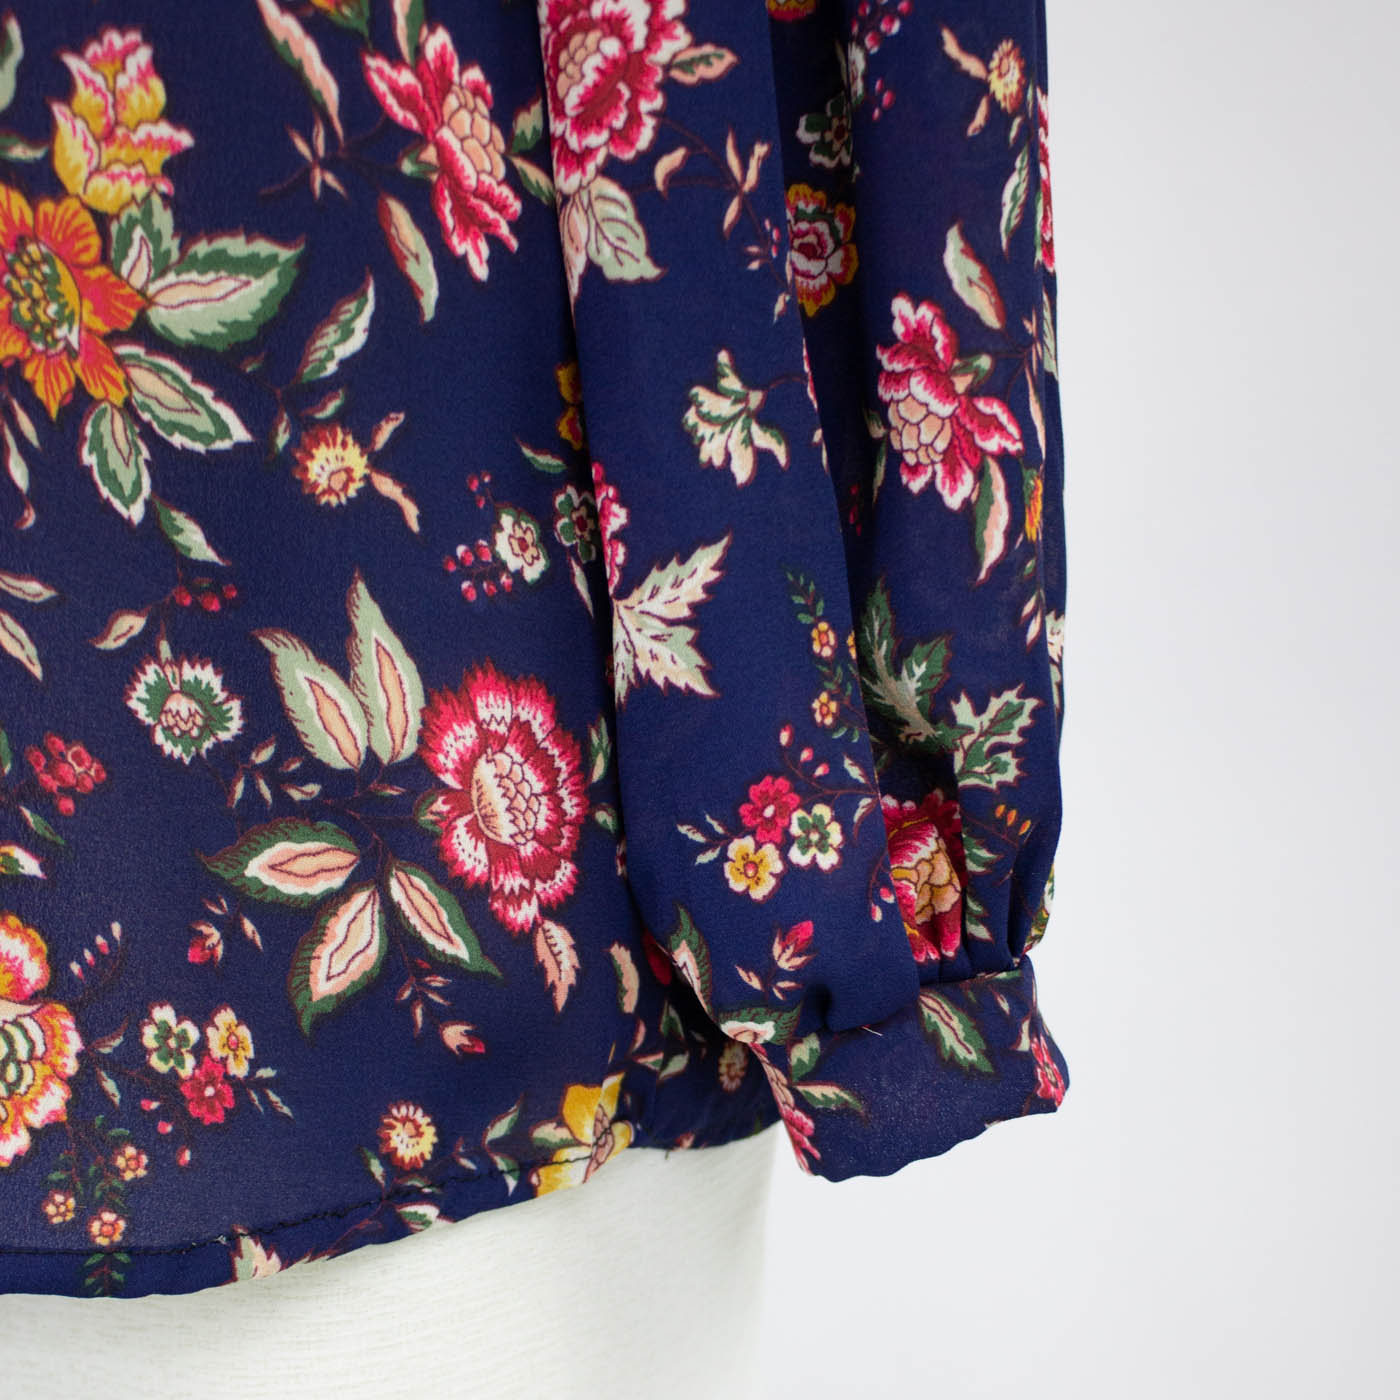 Front Tie Long Sleeve Floral Print Blouse - Navy